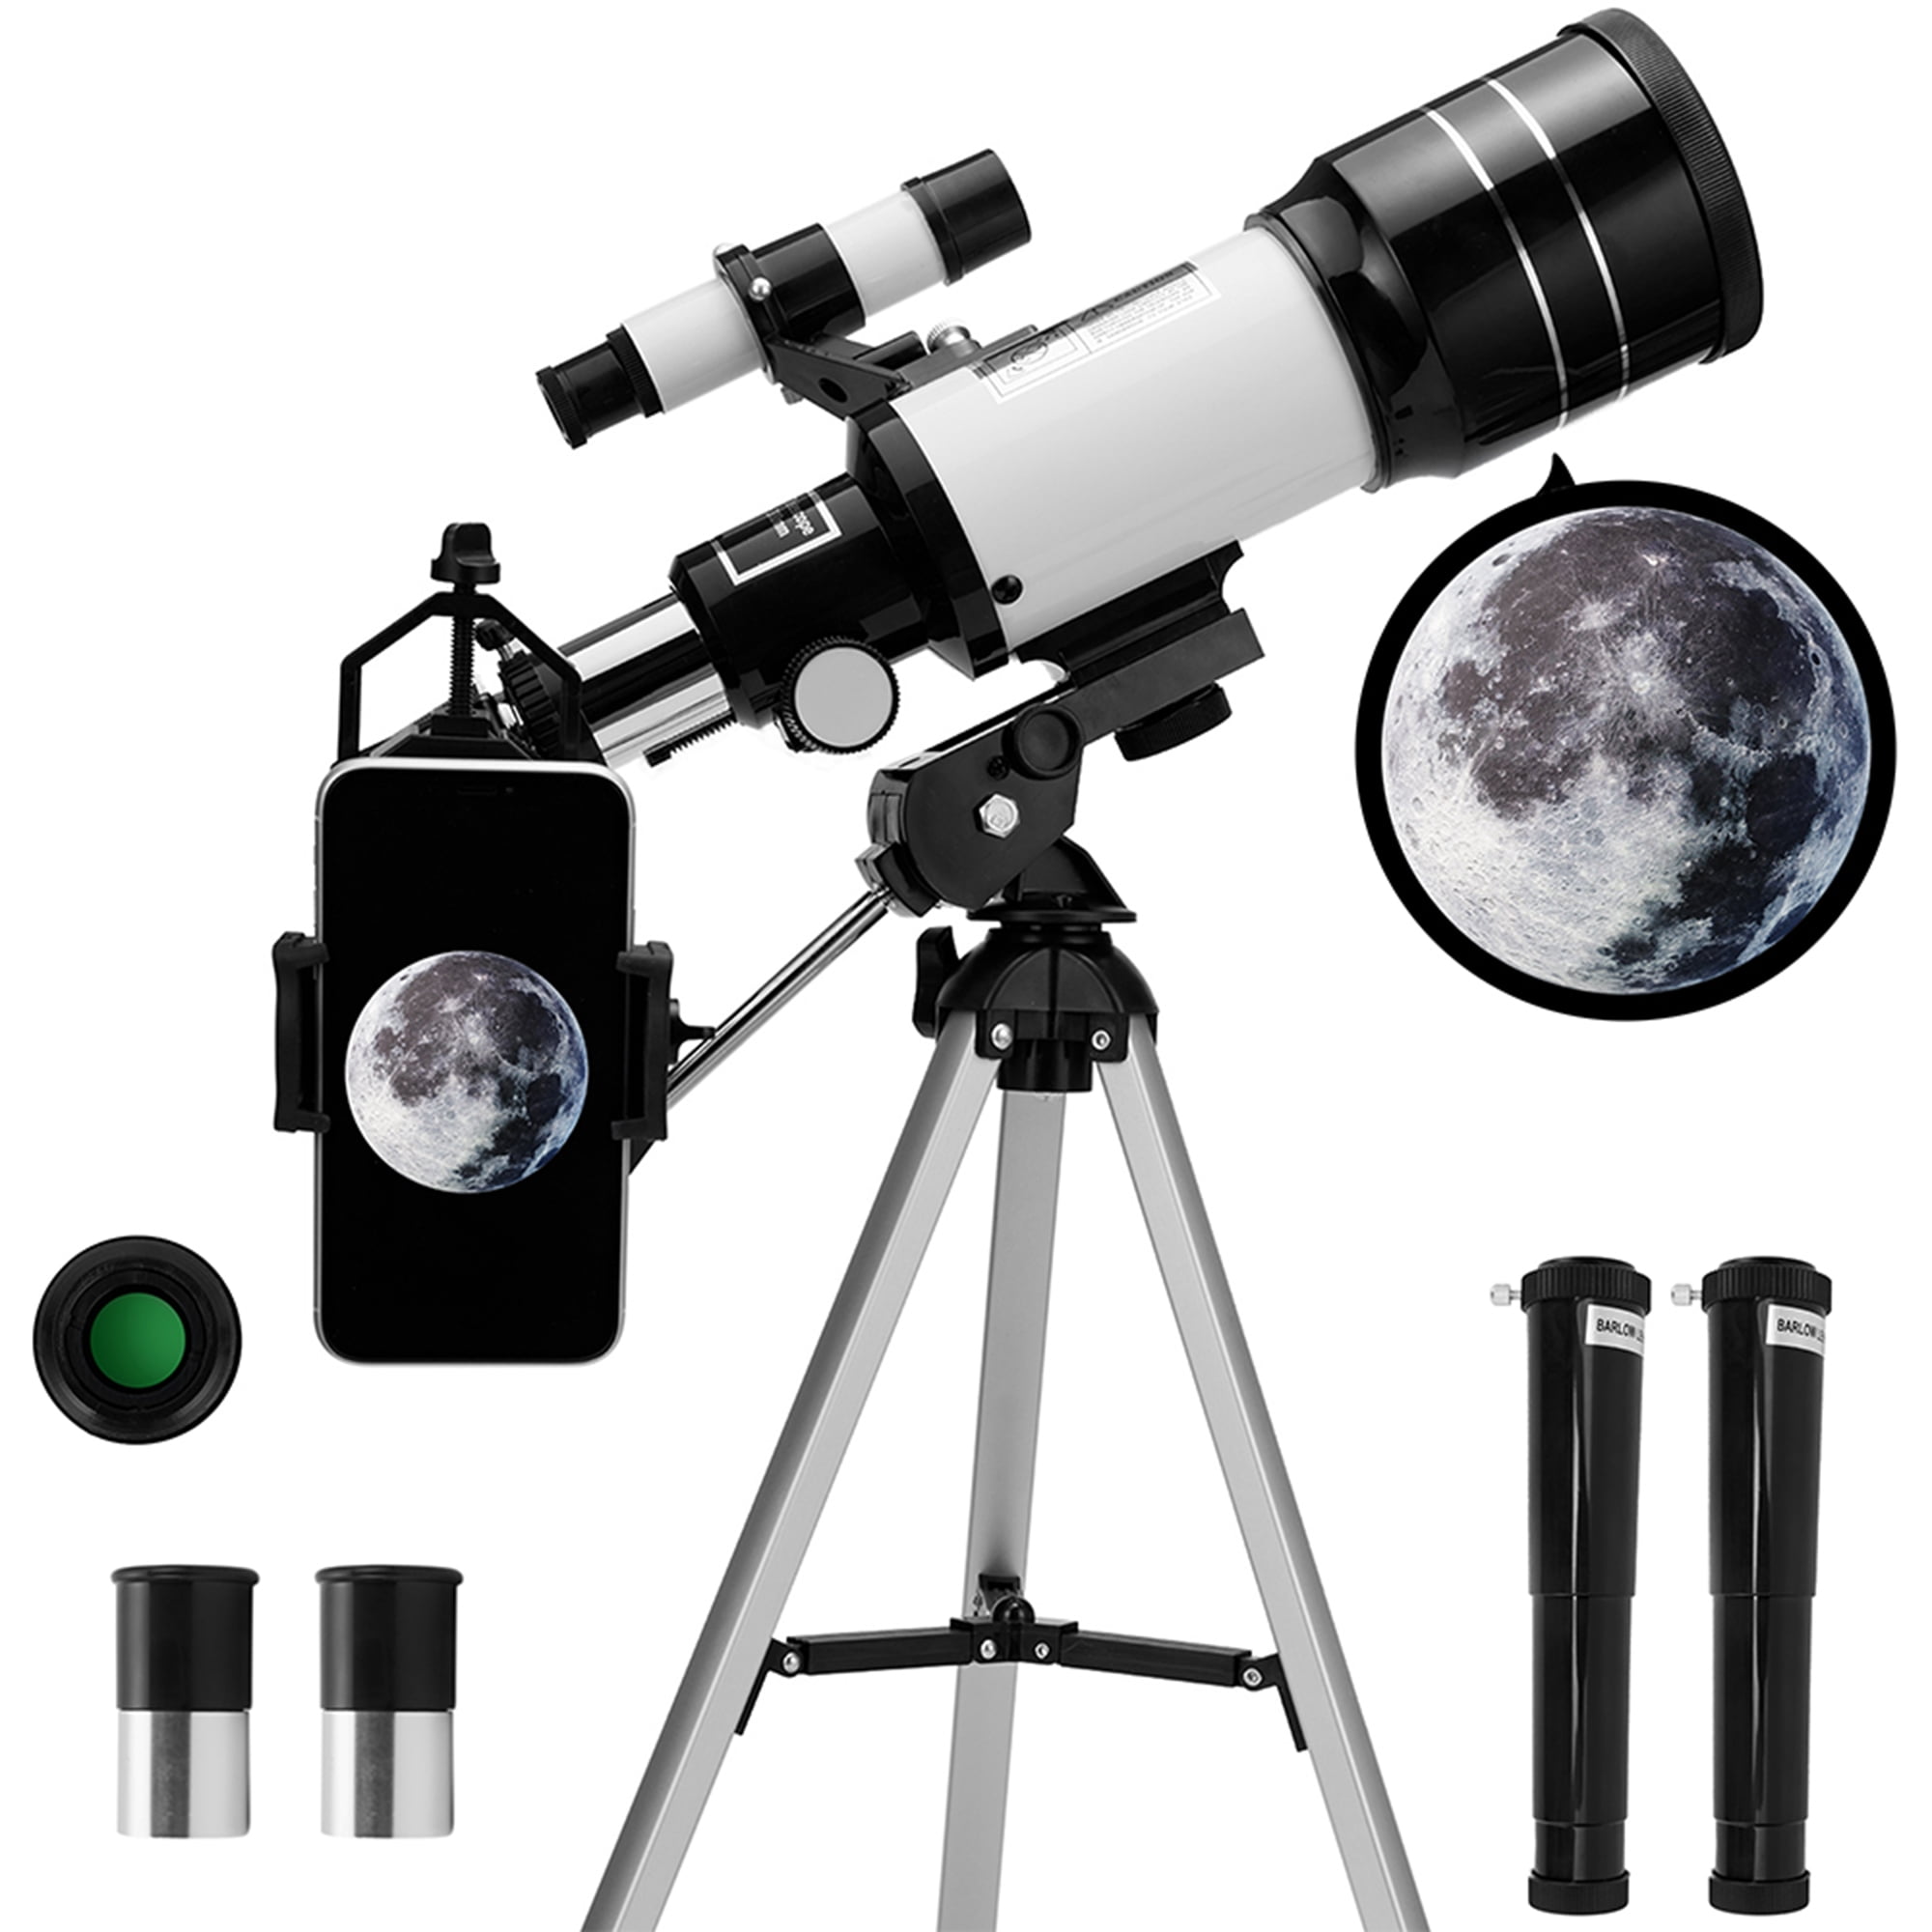 Portable Travel Telescope with Tripod for Viewing Moon and Planet A Astronomy Telescope for Kids Adults Beginners,70mm Aperture Astronomical Telescope Refractor 